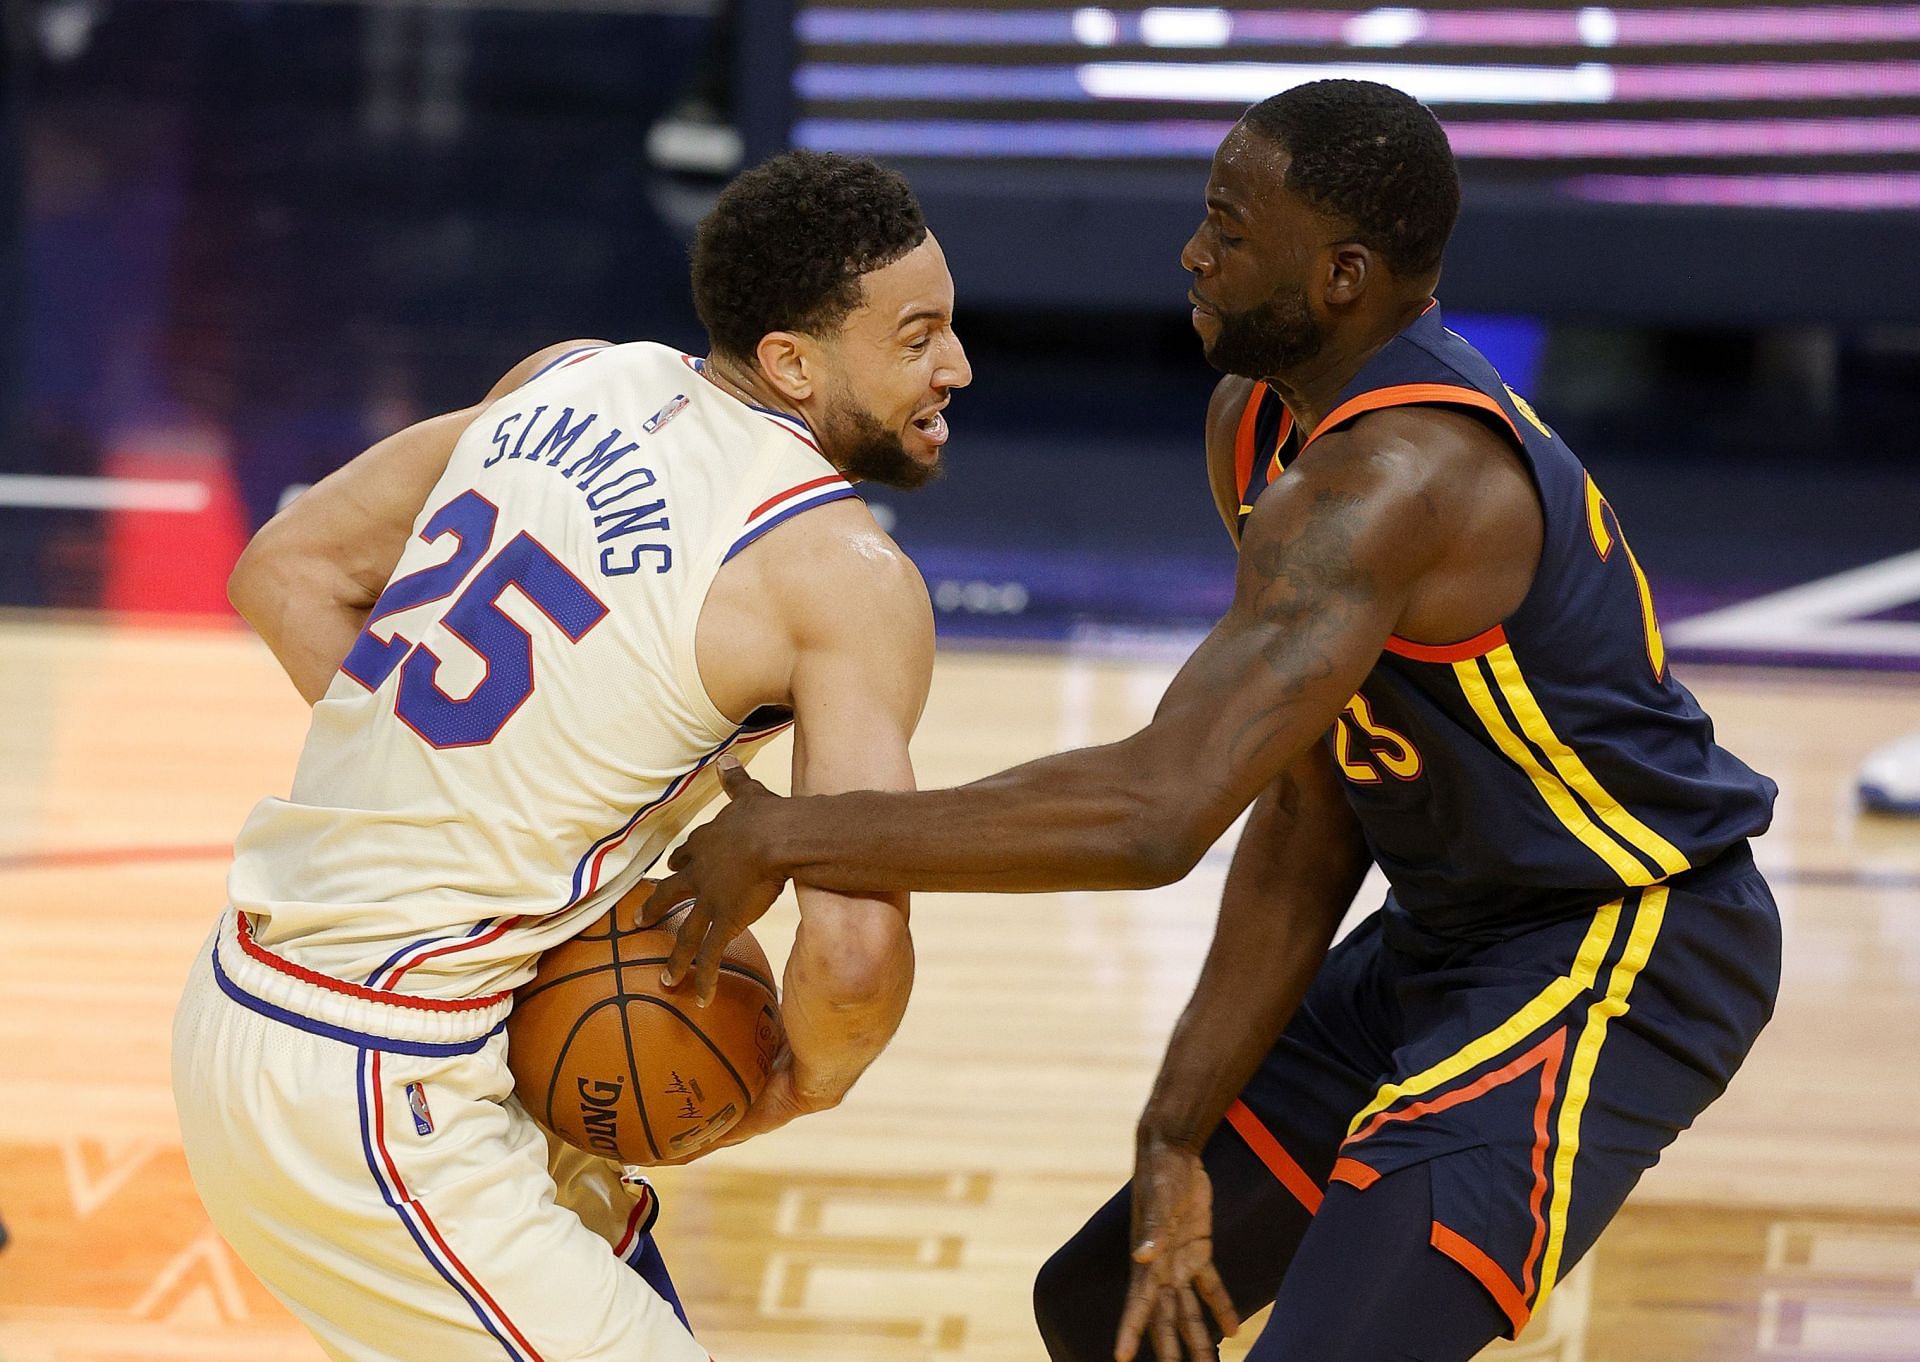 Ben Simmons of the Philadelphia 76ers and Draymond Green of the Golden State Warriors.